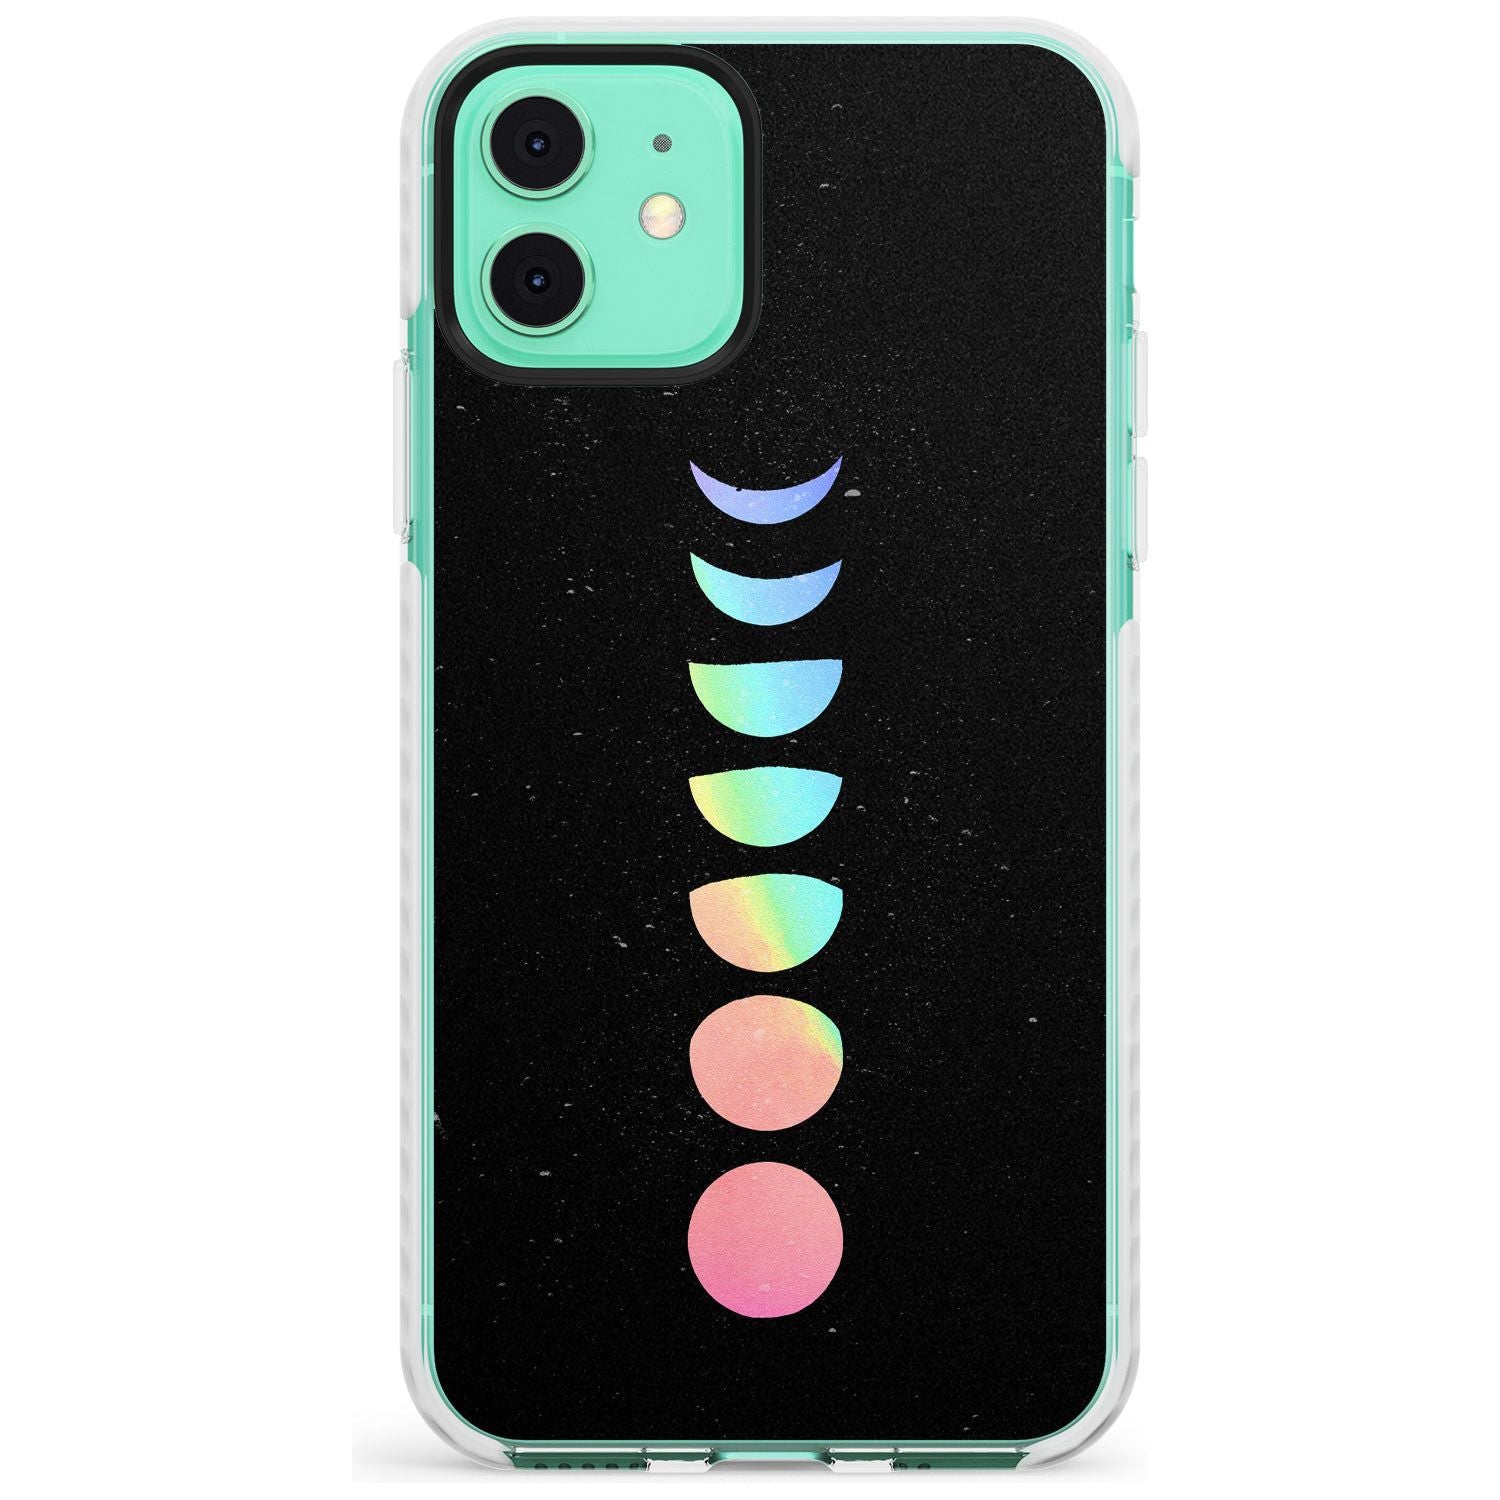 Pastel Moon Phases Slim TPU Phone Case for iPhone 11